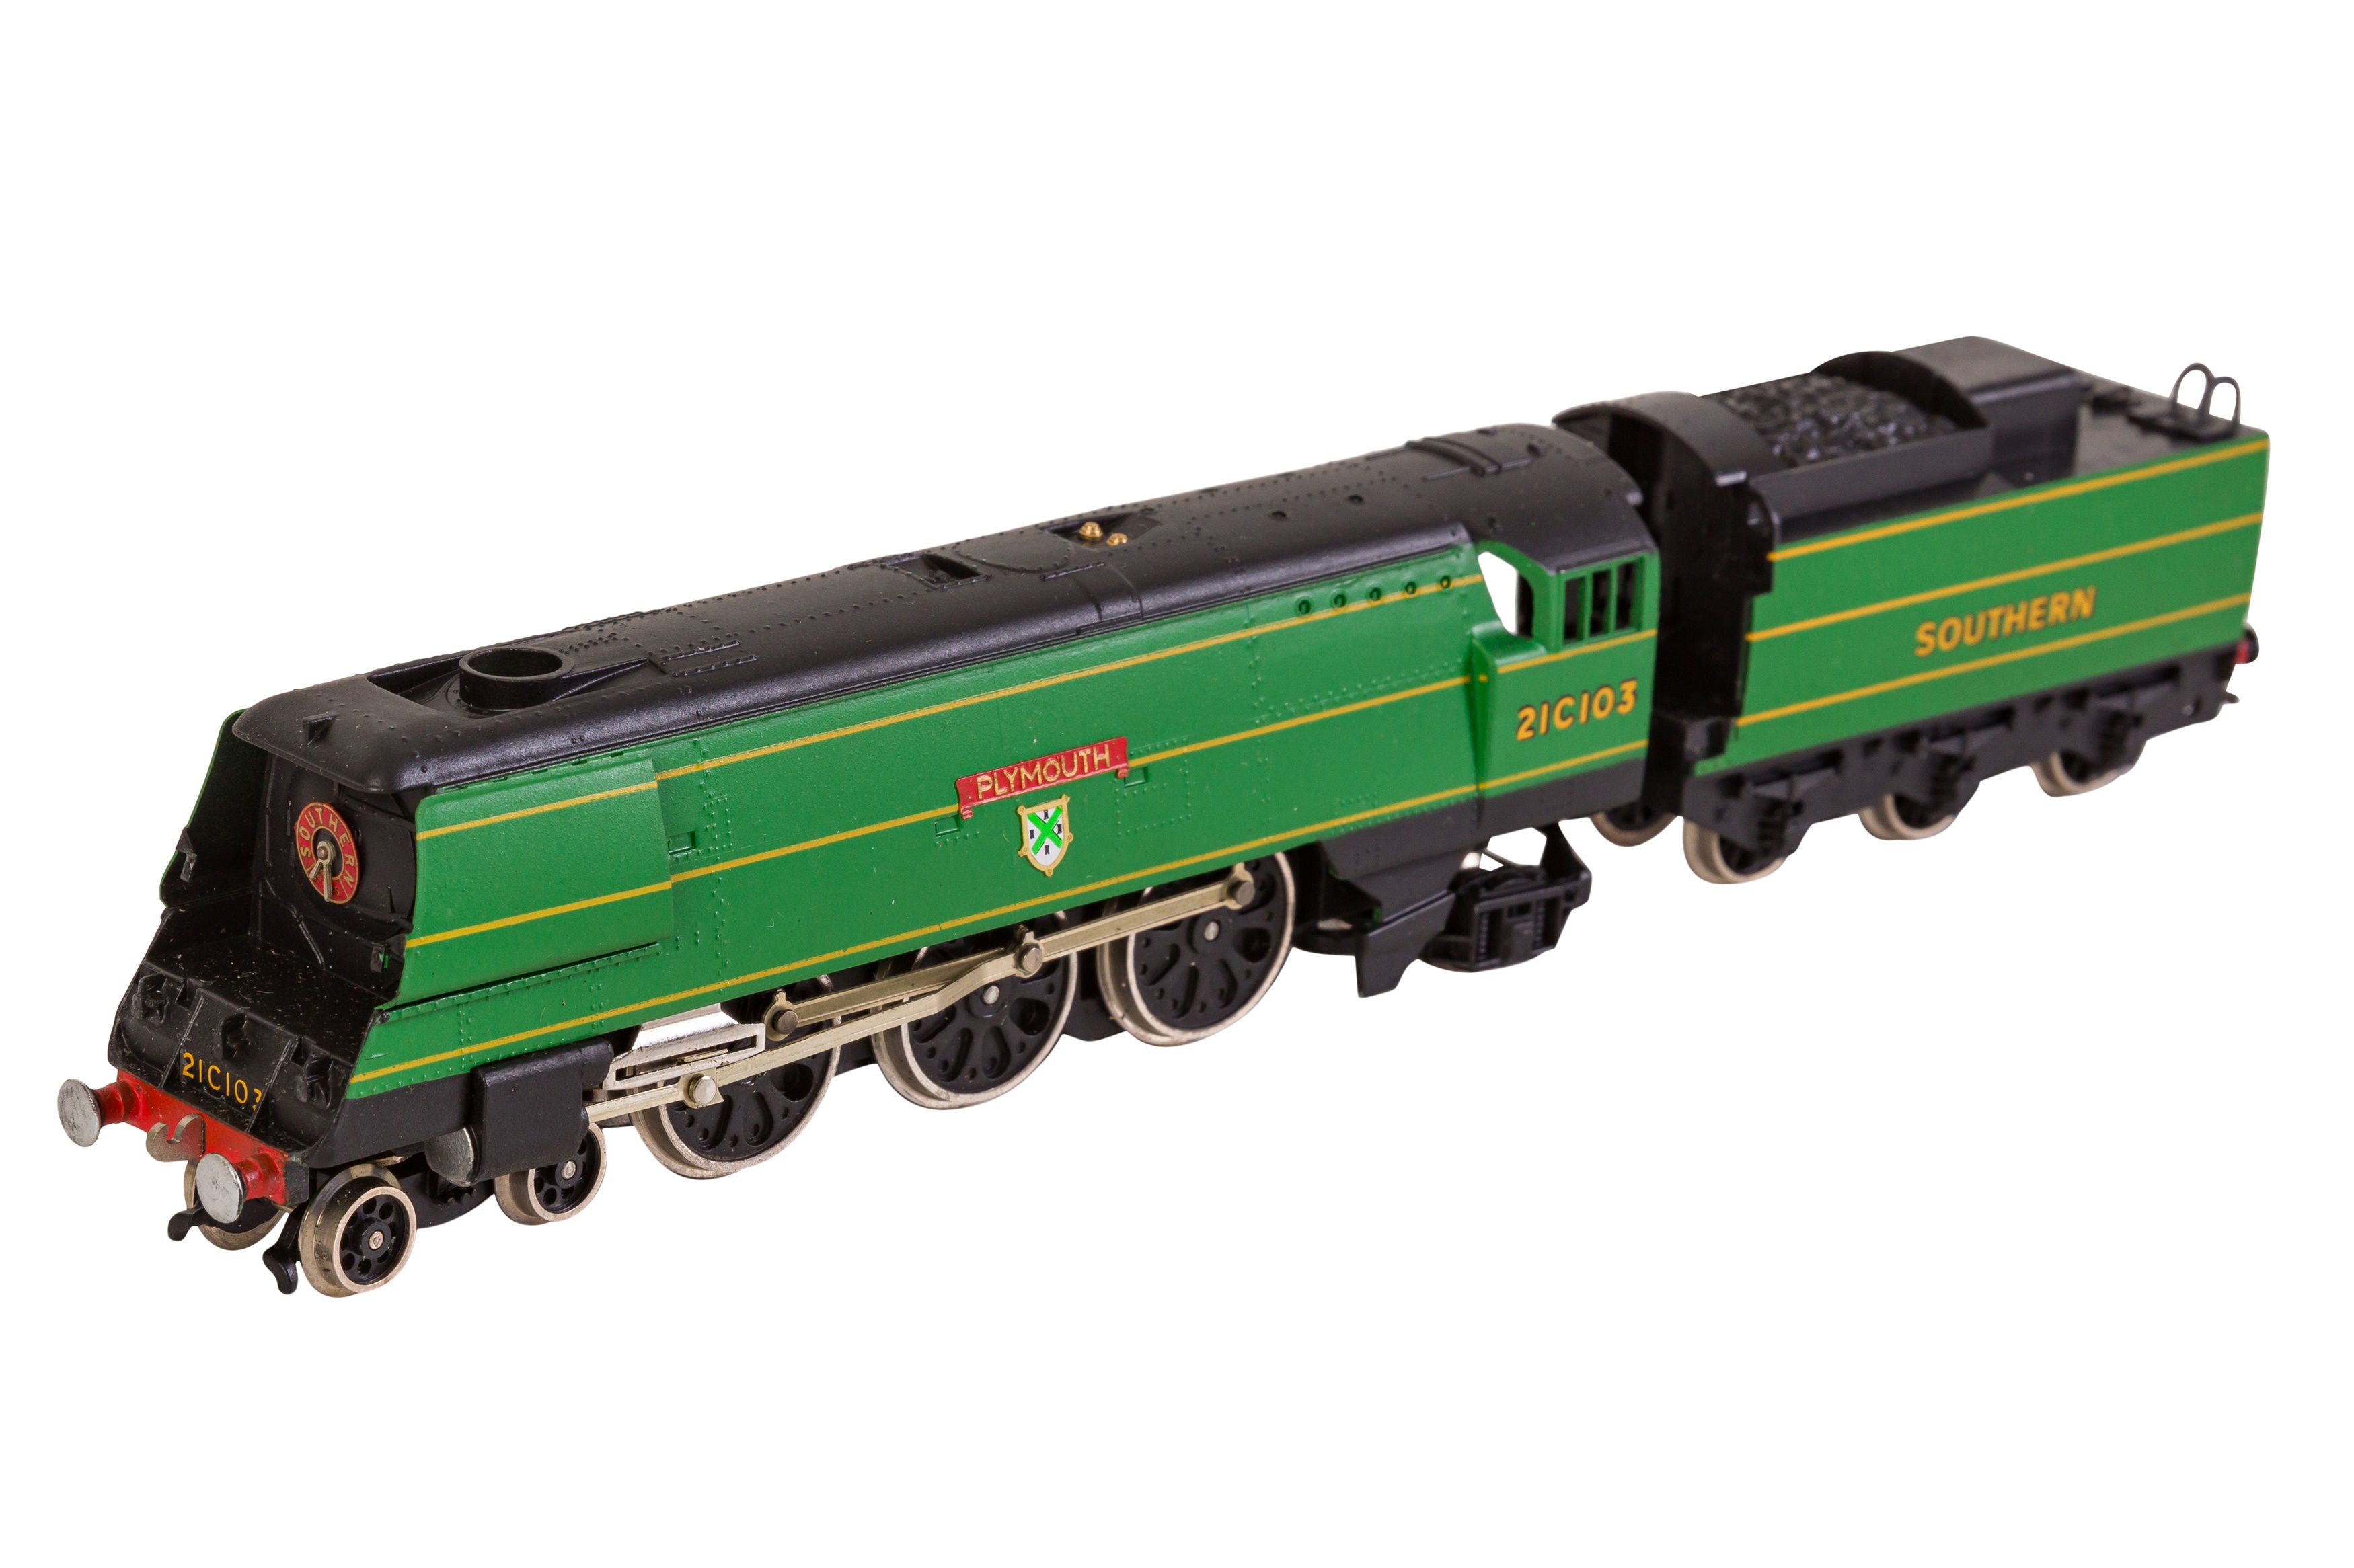 A WRENN OO GAUGE W2266 STREAMLINED WEST COUNTRY CLASS LOCOMOTIVE 'PLYMOUTH' - Image 2 of 7